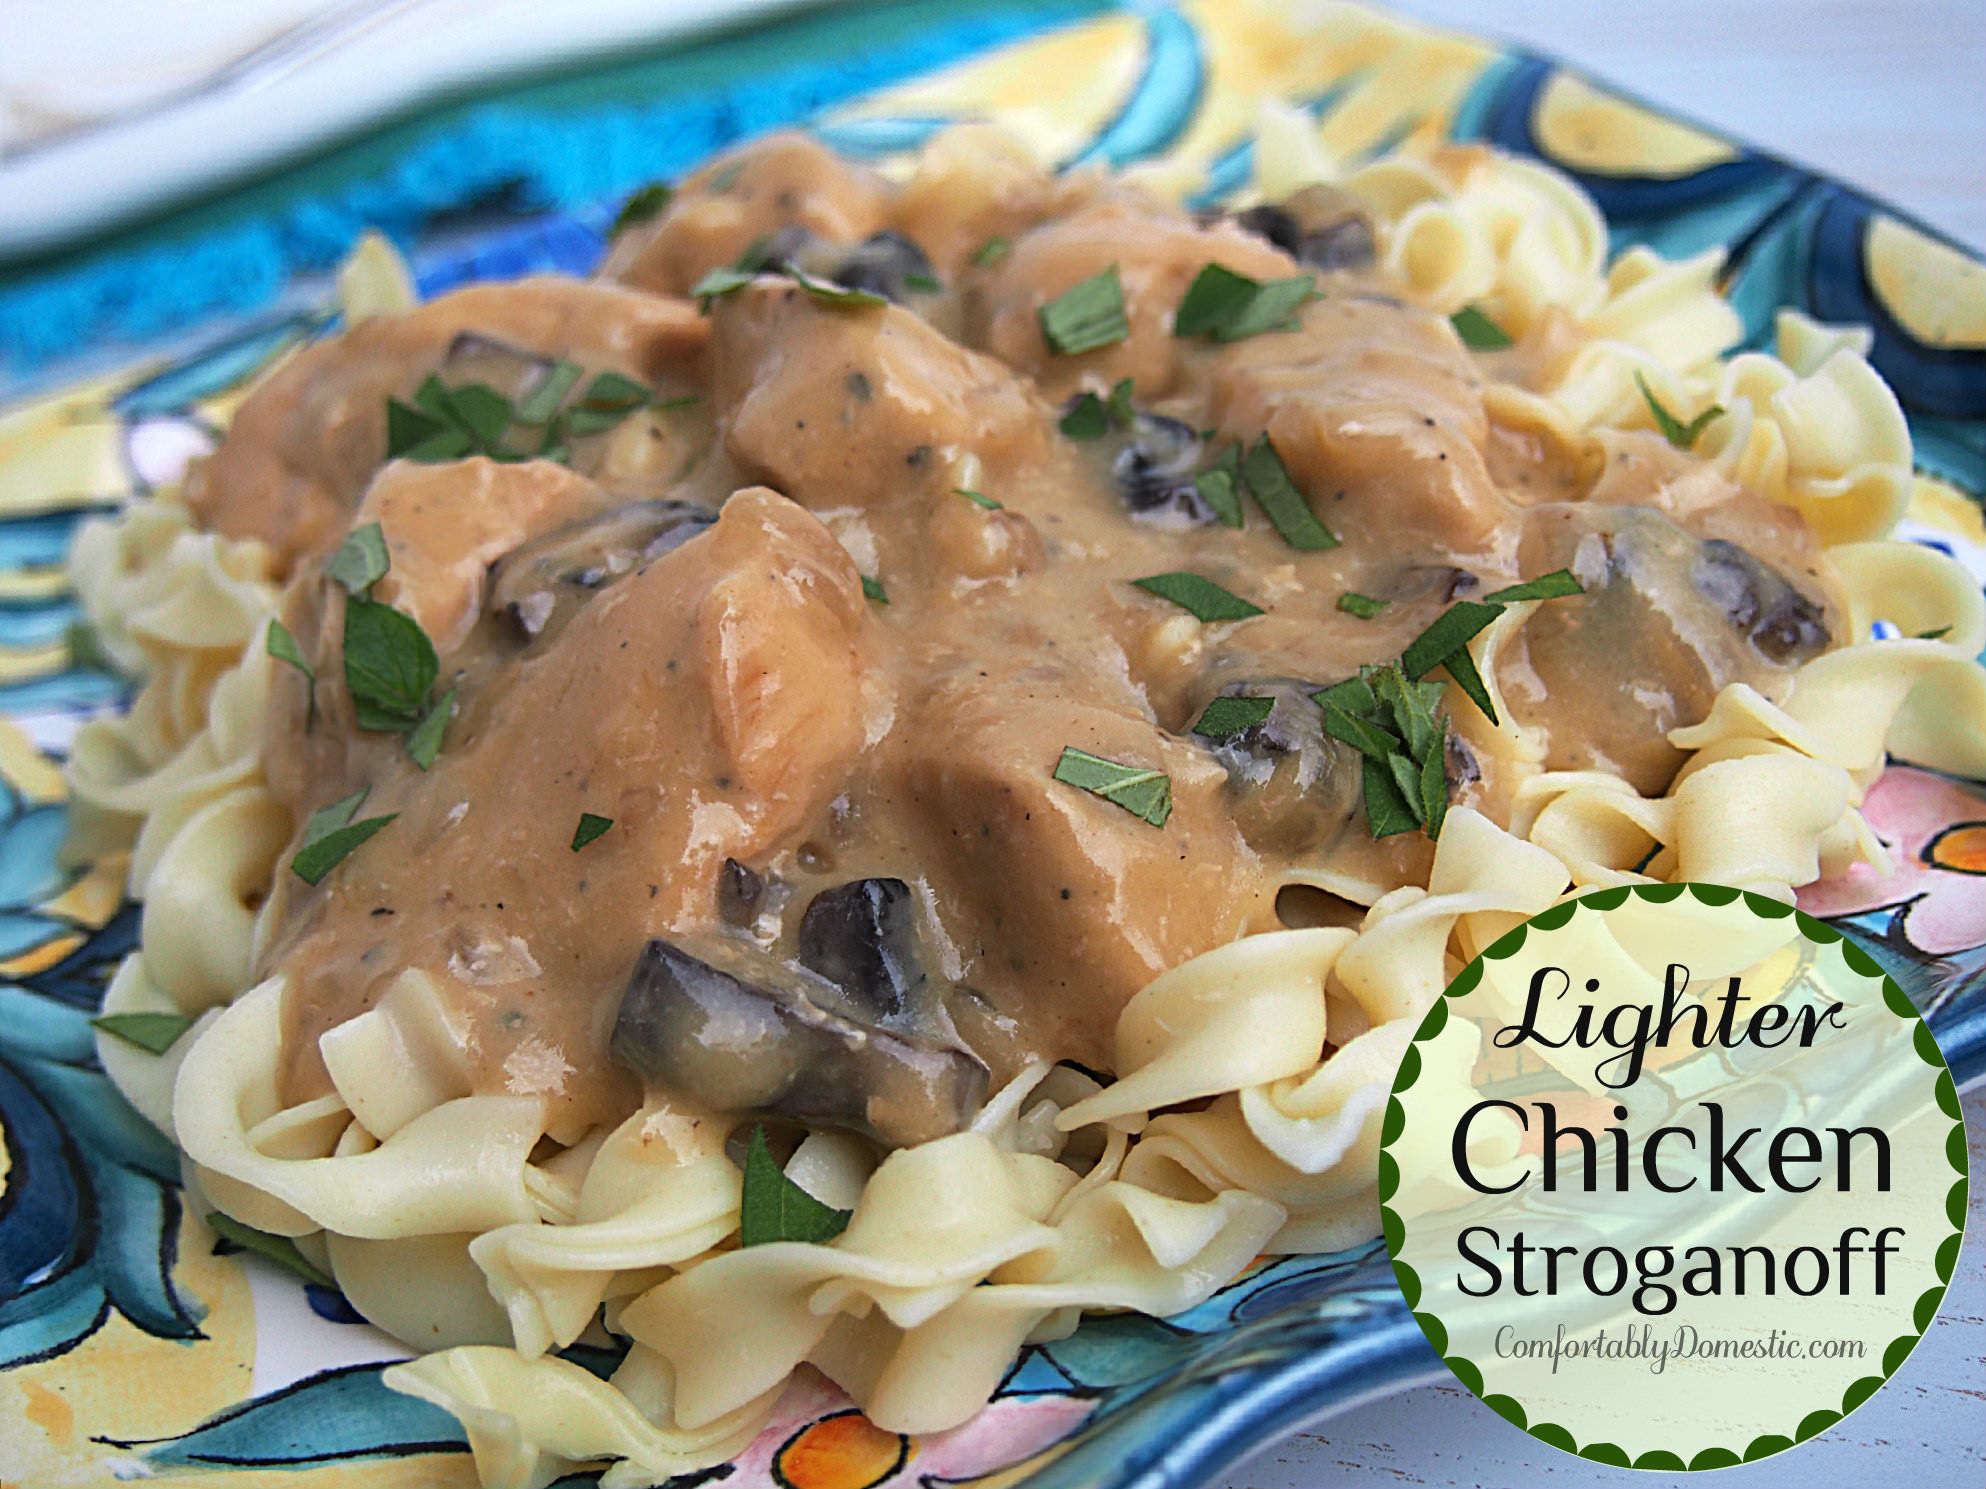 Chicken stroganoff has all the creamy comfort of beef stroganoff, made lighter with chicken. Comes together easily, making a delicious weeknight dinner. | ComfortablyDomestic.com